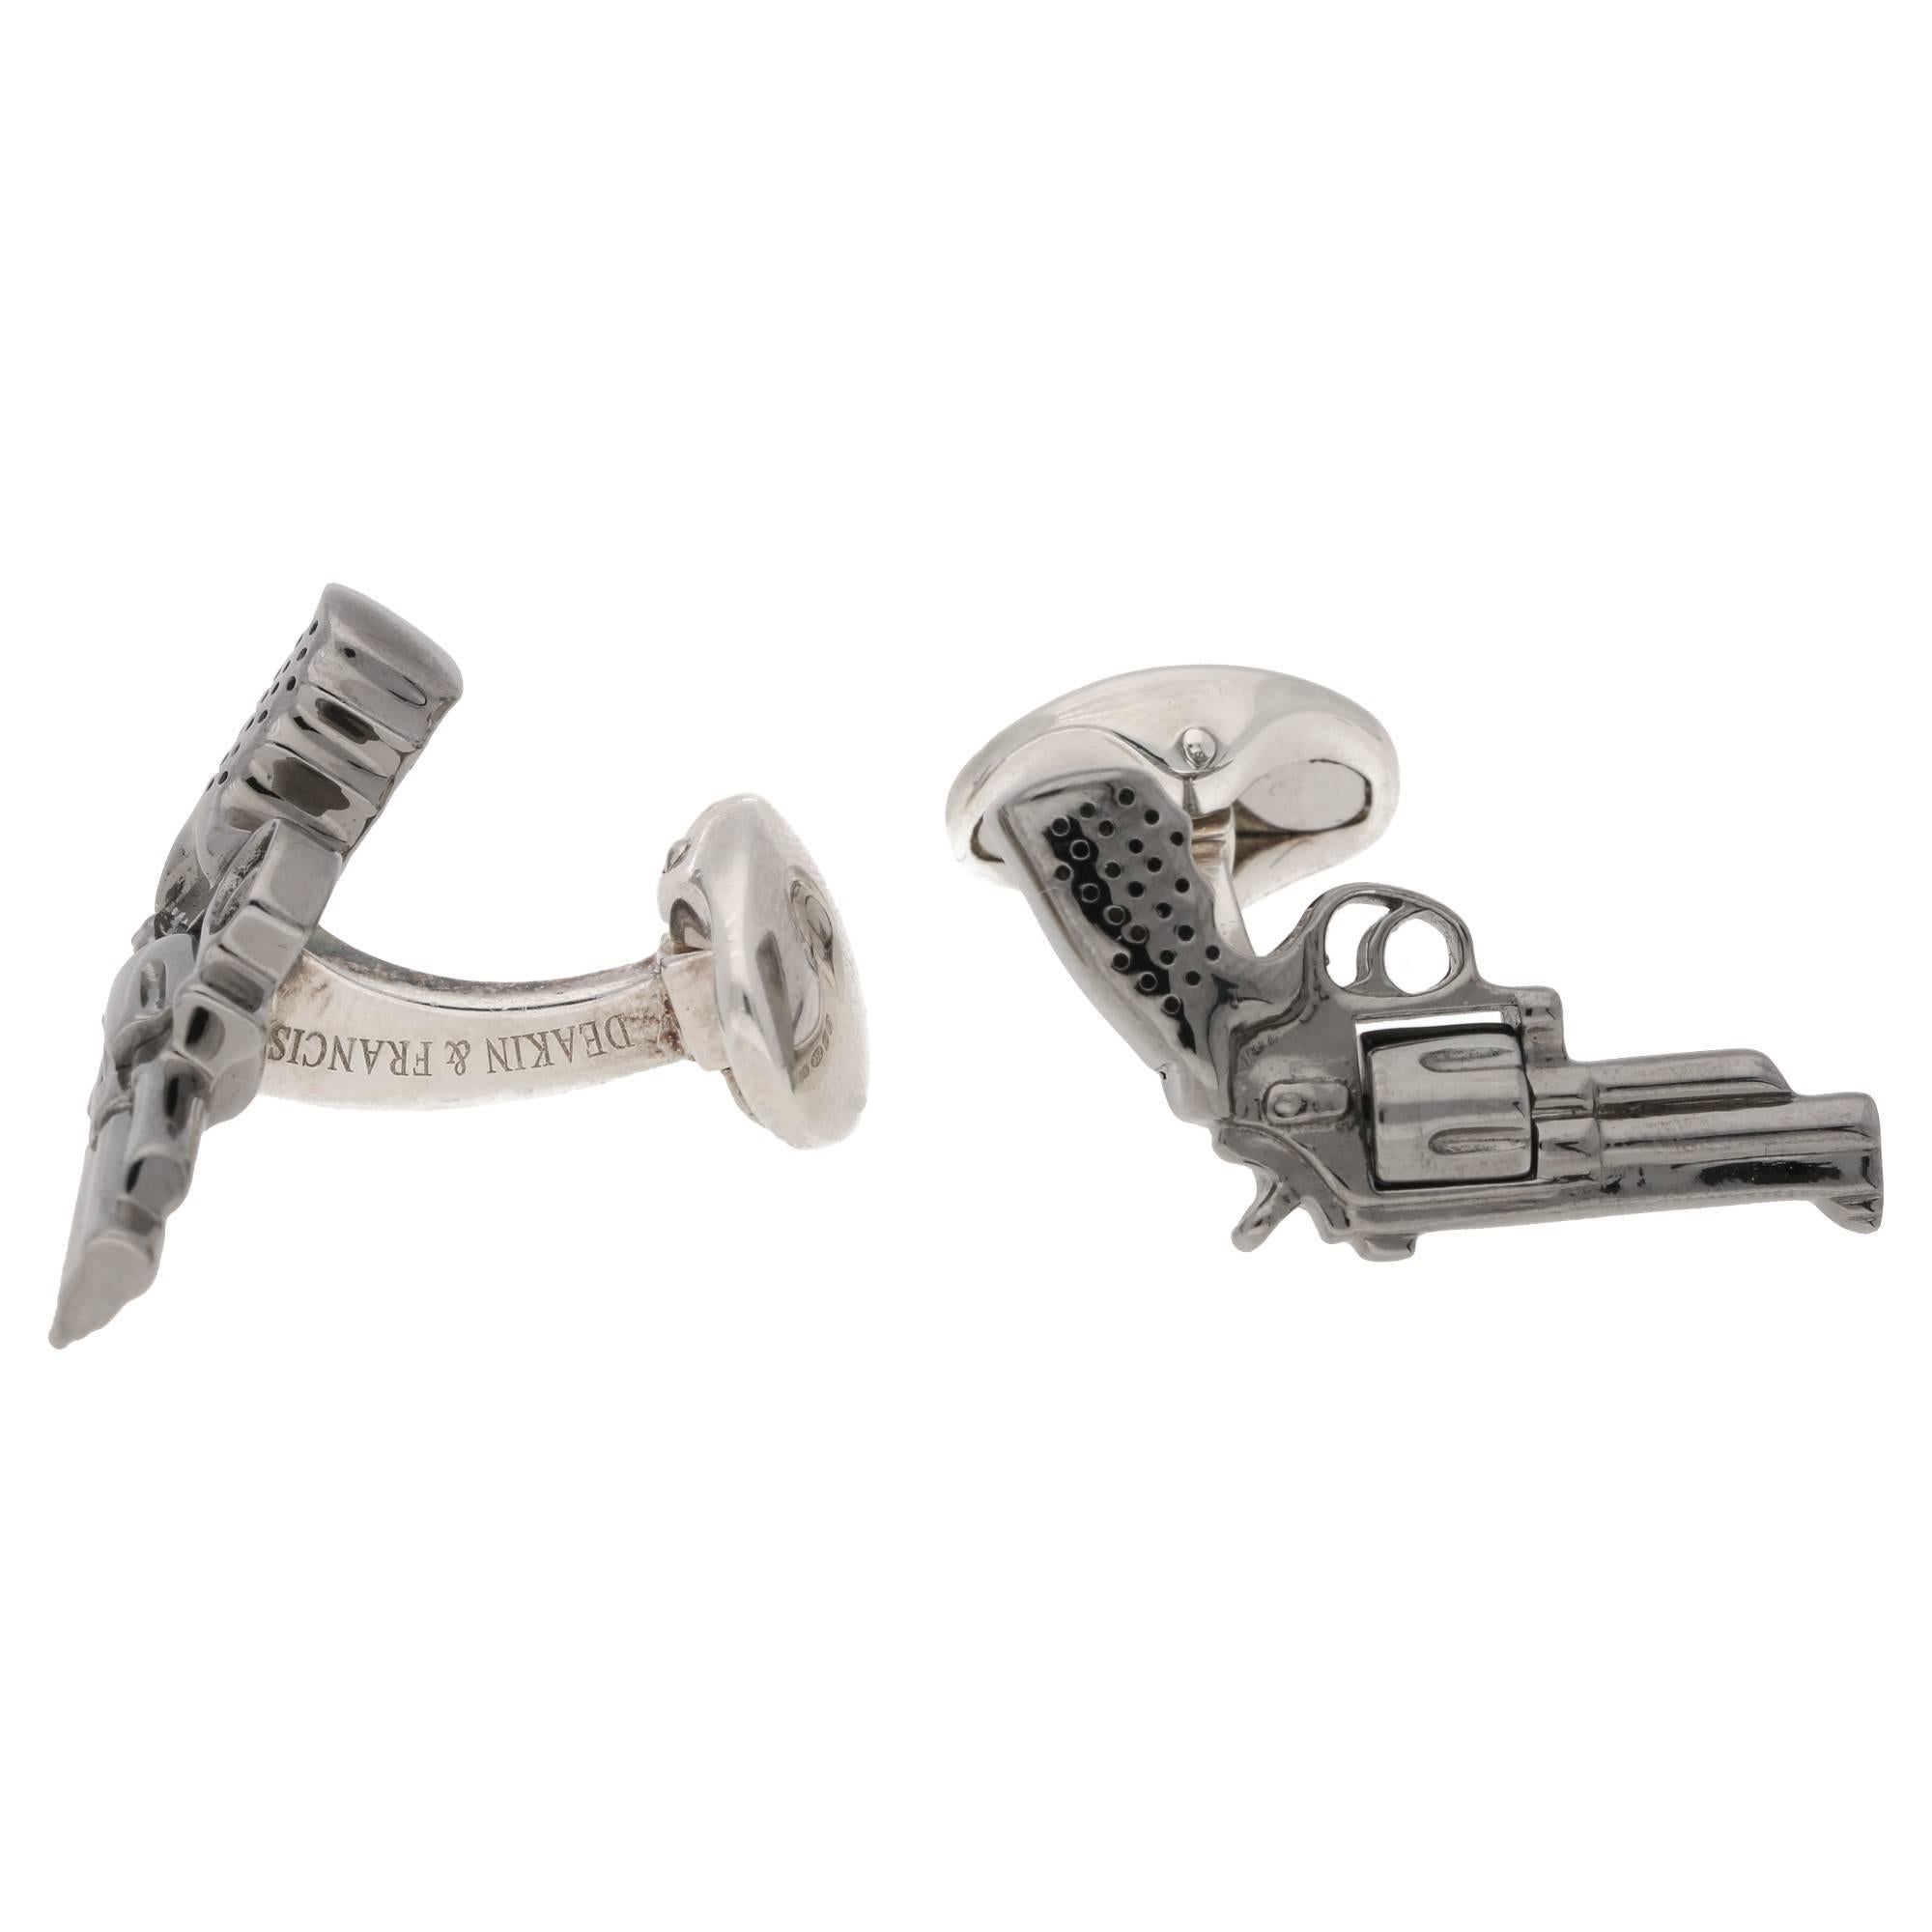 A pair of British 925 Sterling Silver and hand painted enamel sprung revolver cufflinks. The detail is wonderful, the barrel even spins! These are set on a small domed oval spring link fitting.
